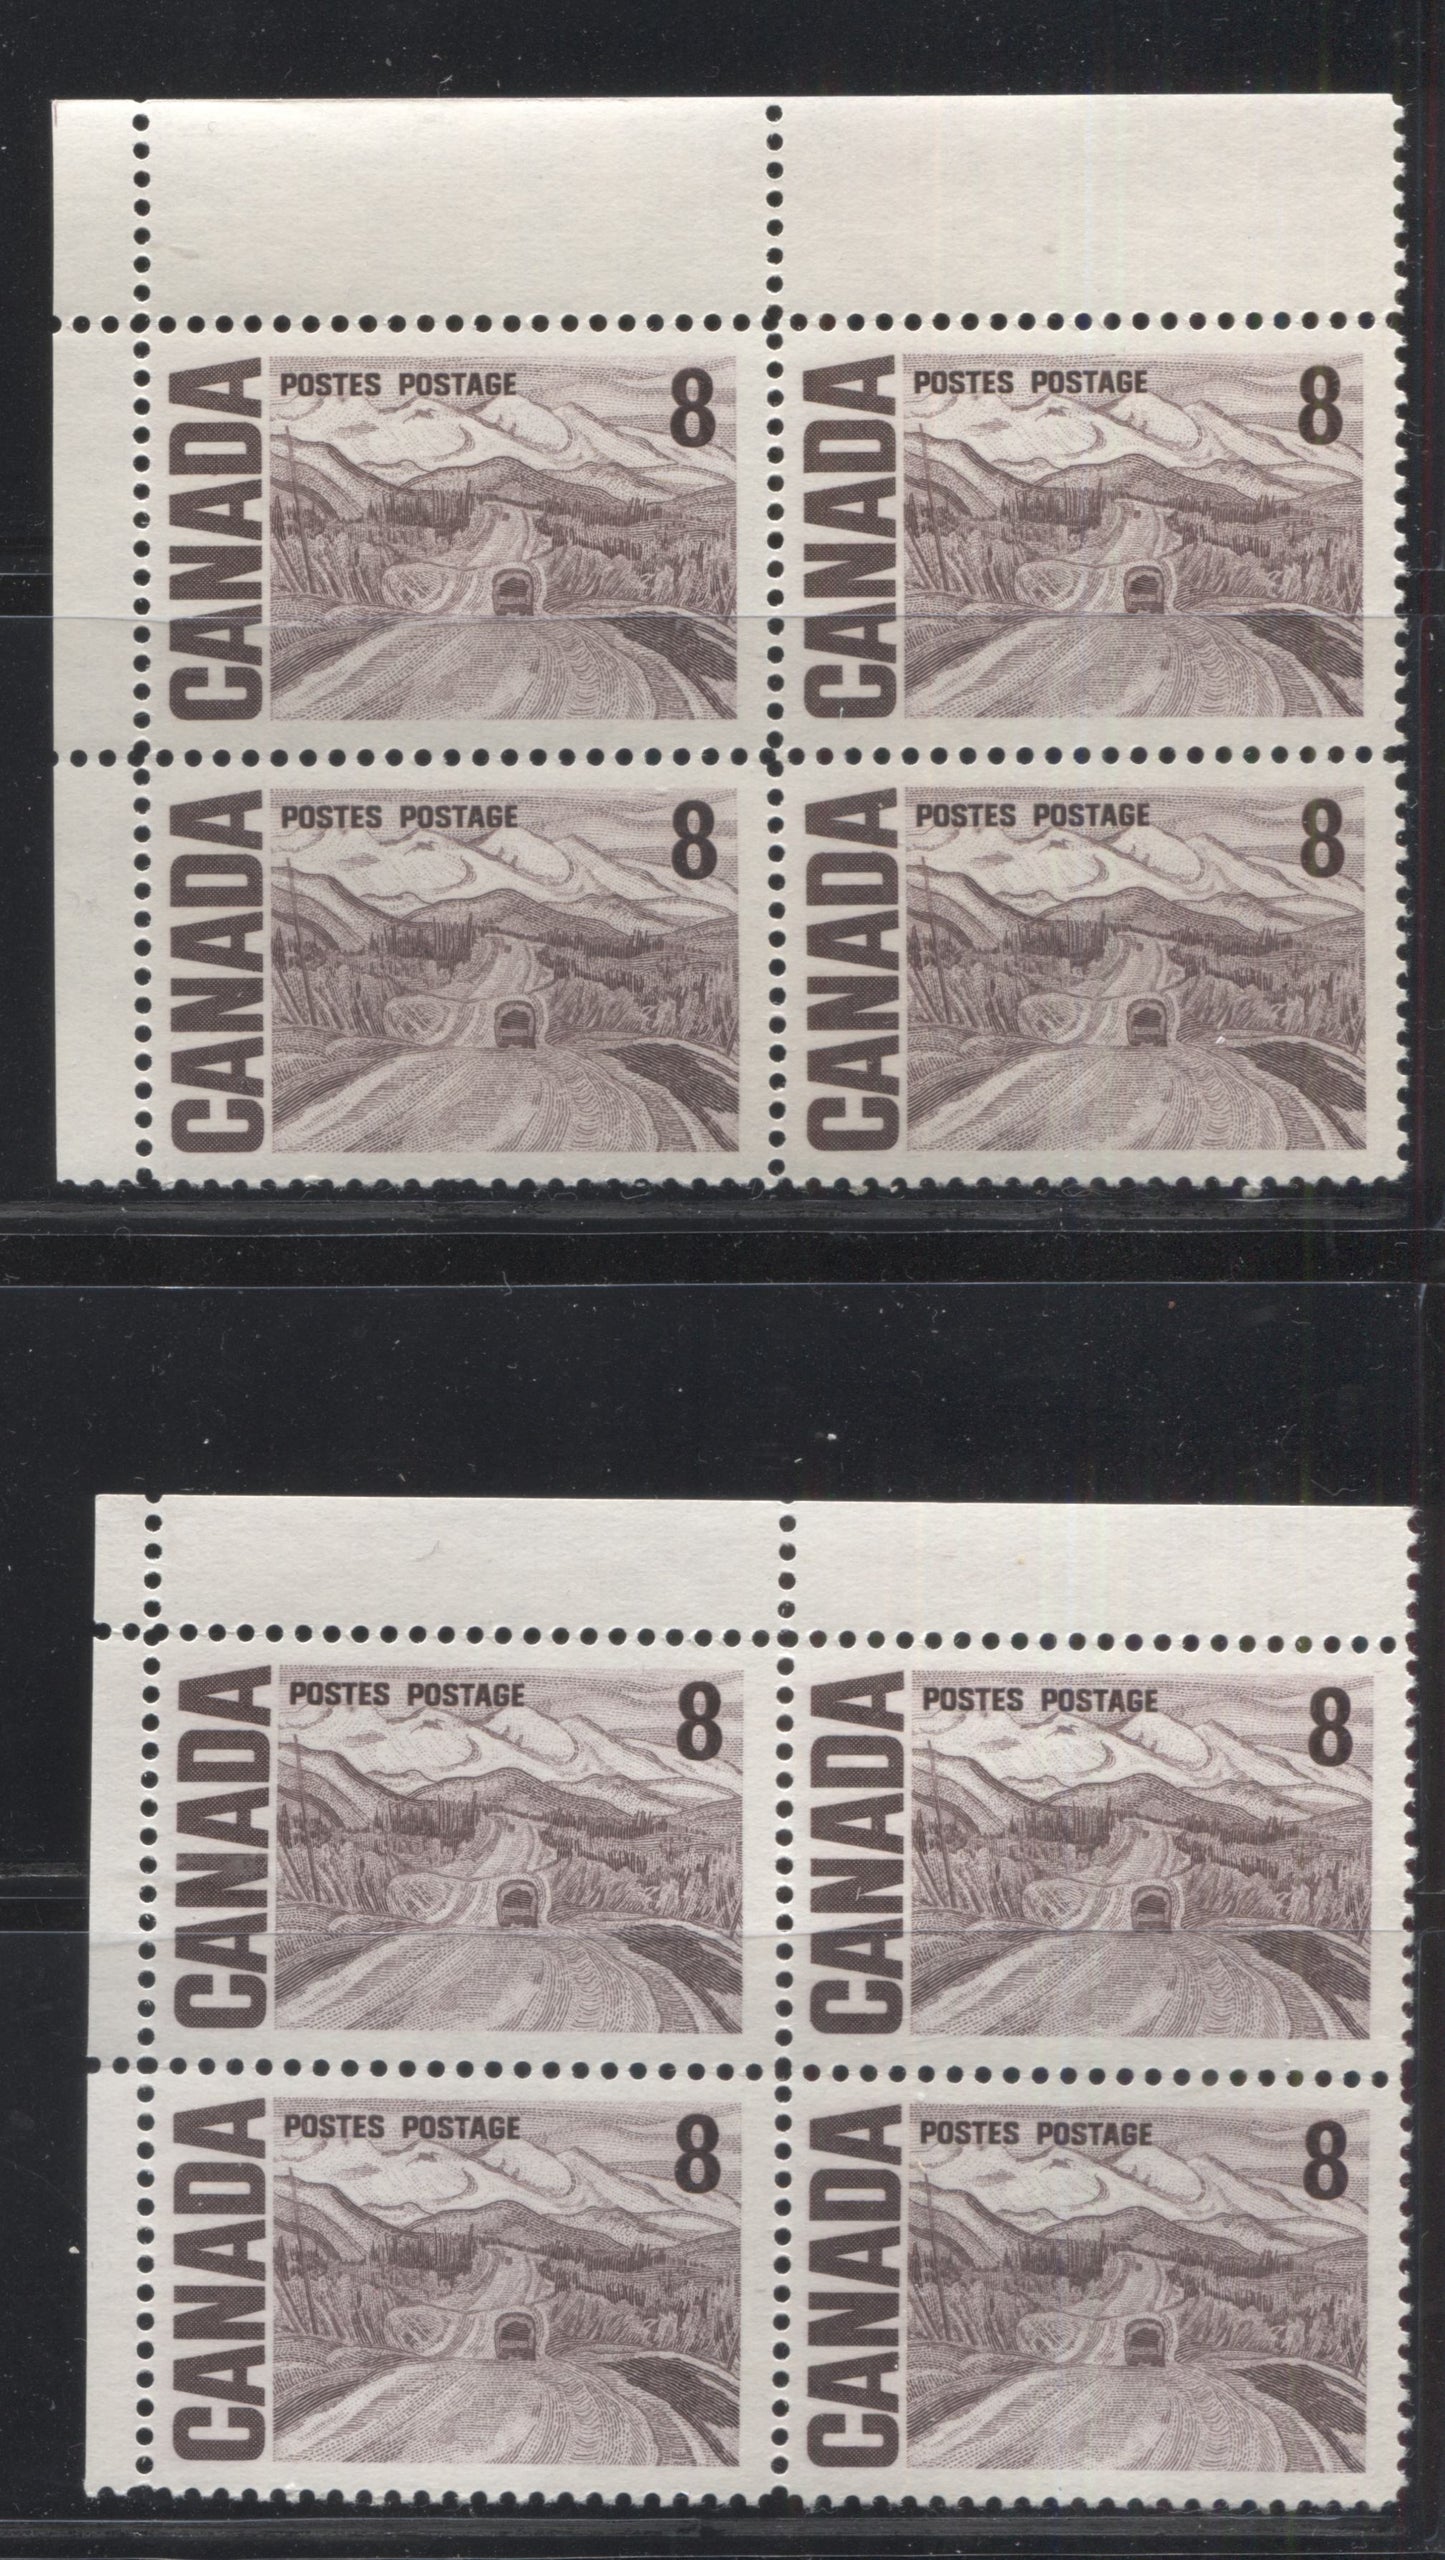 Lot 28 Canada #461i 8c Violet Brown Alaska Highway, 1967-1973 Centennial Definitive Issue, Two F/VFNH UL Field Stock Blocks Of 4 On DF-fl Vertical & Horizontal Wove Papers With Very Few LF Fibers, With Streaky & Smooth Dex Gums